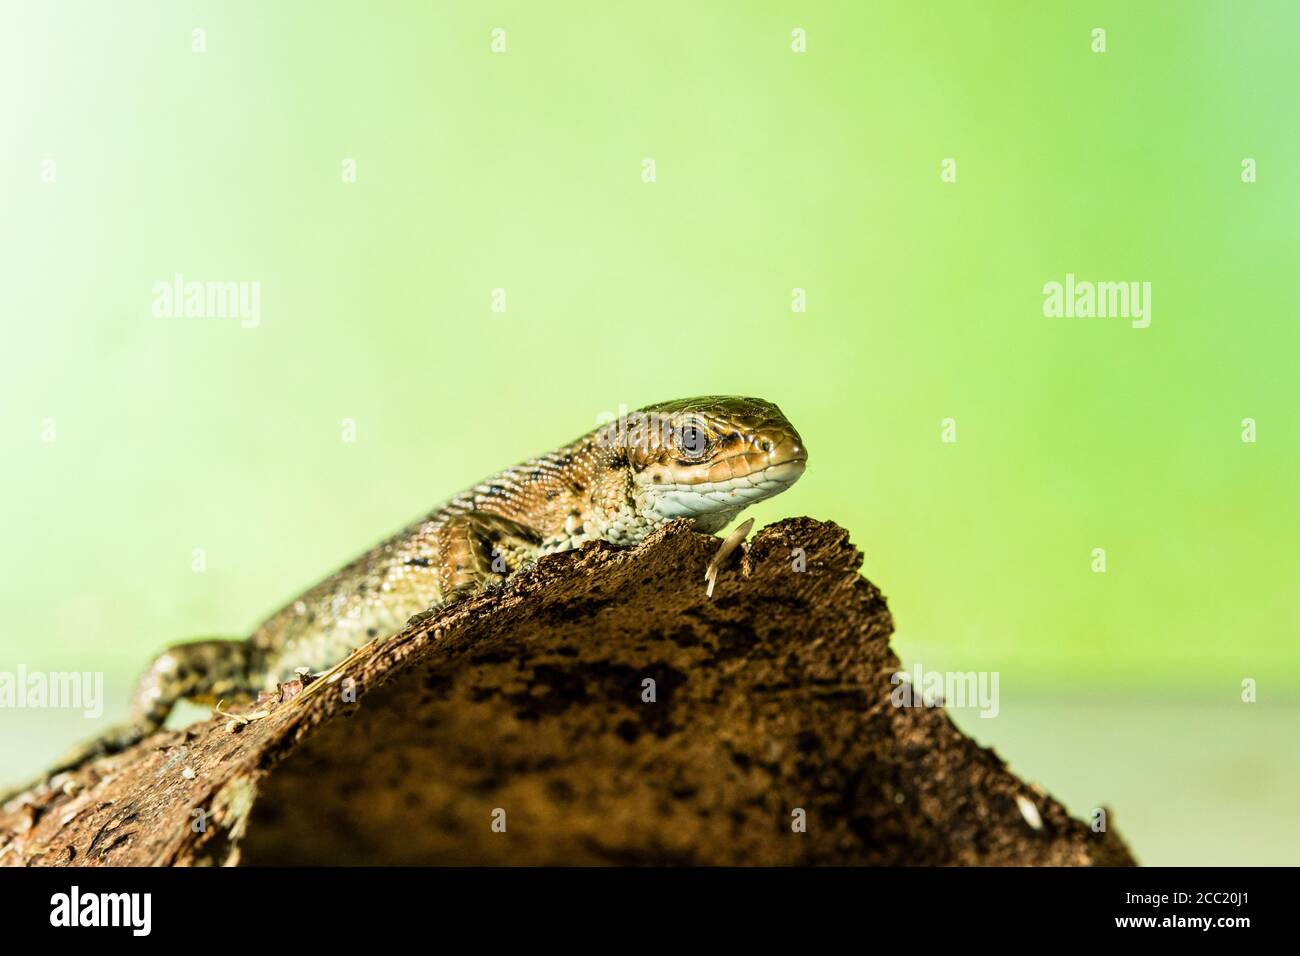 A common lizard photographed in controlled circumstances and released unharmed Stock Photo